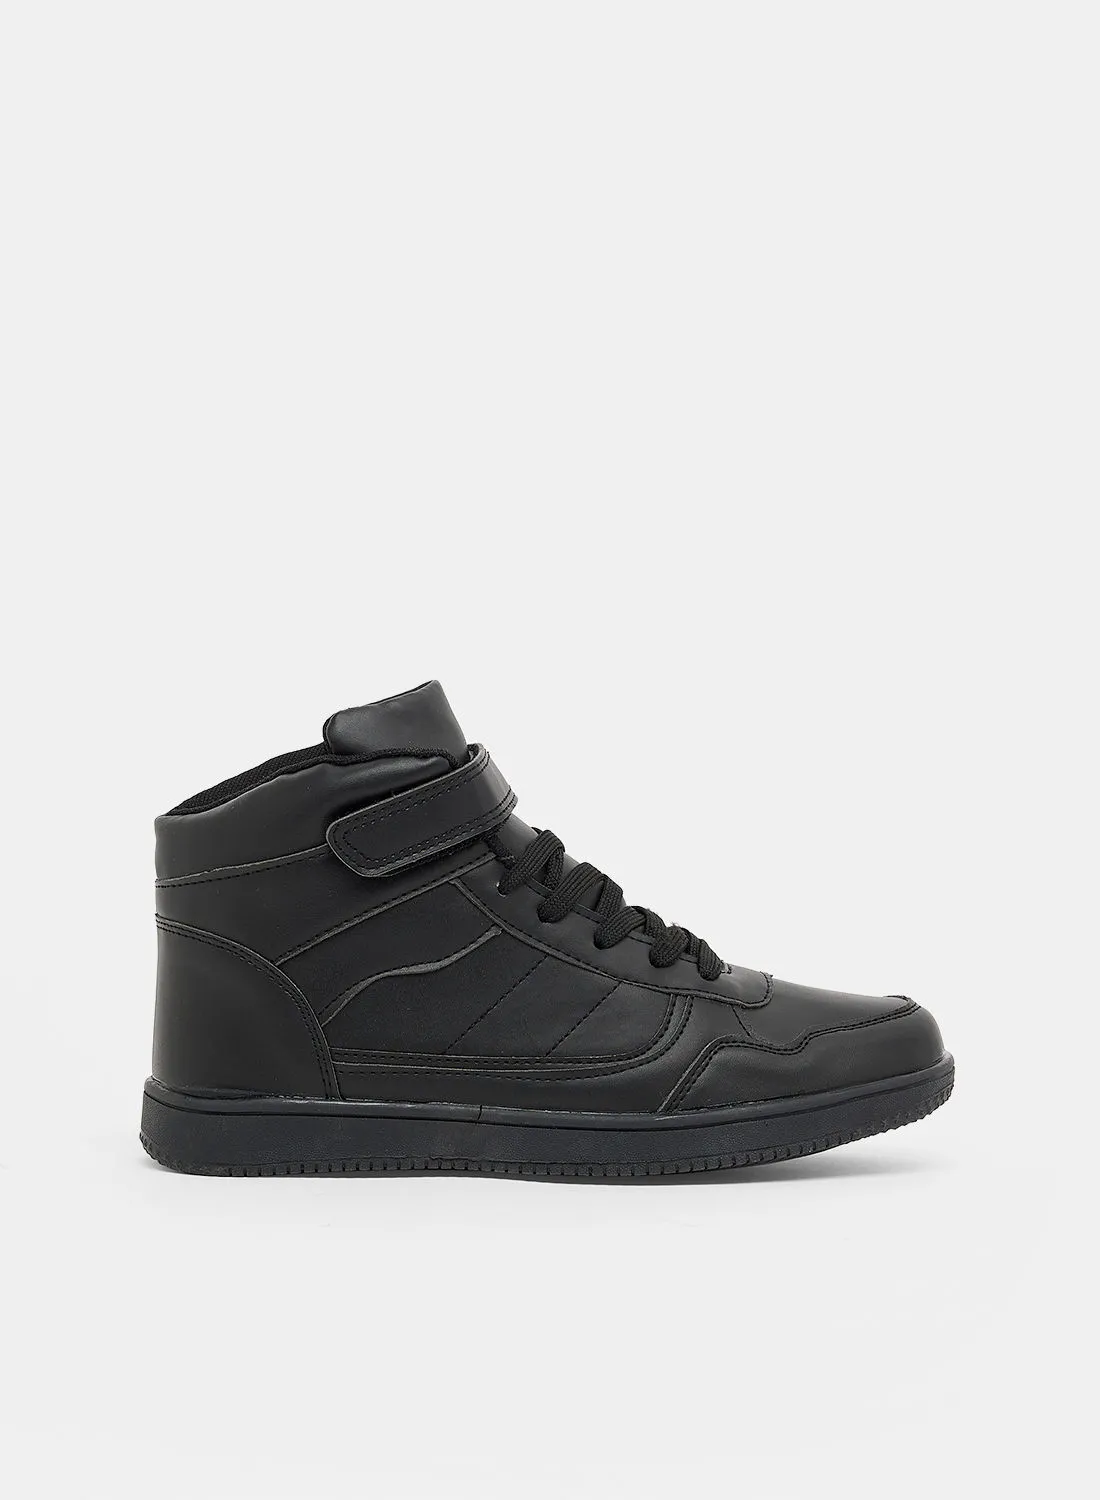 Spot-On Faux Leather High Top Sneakers